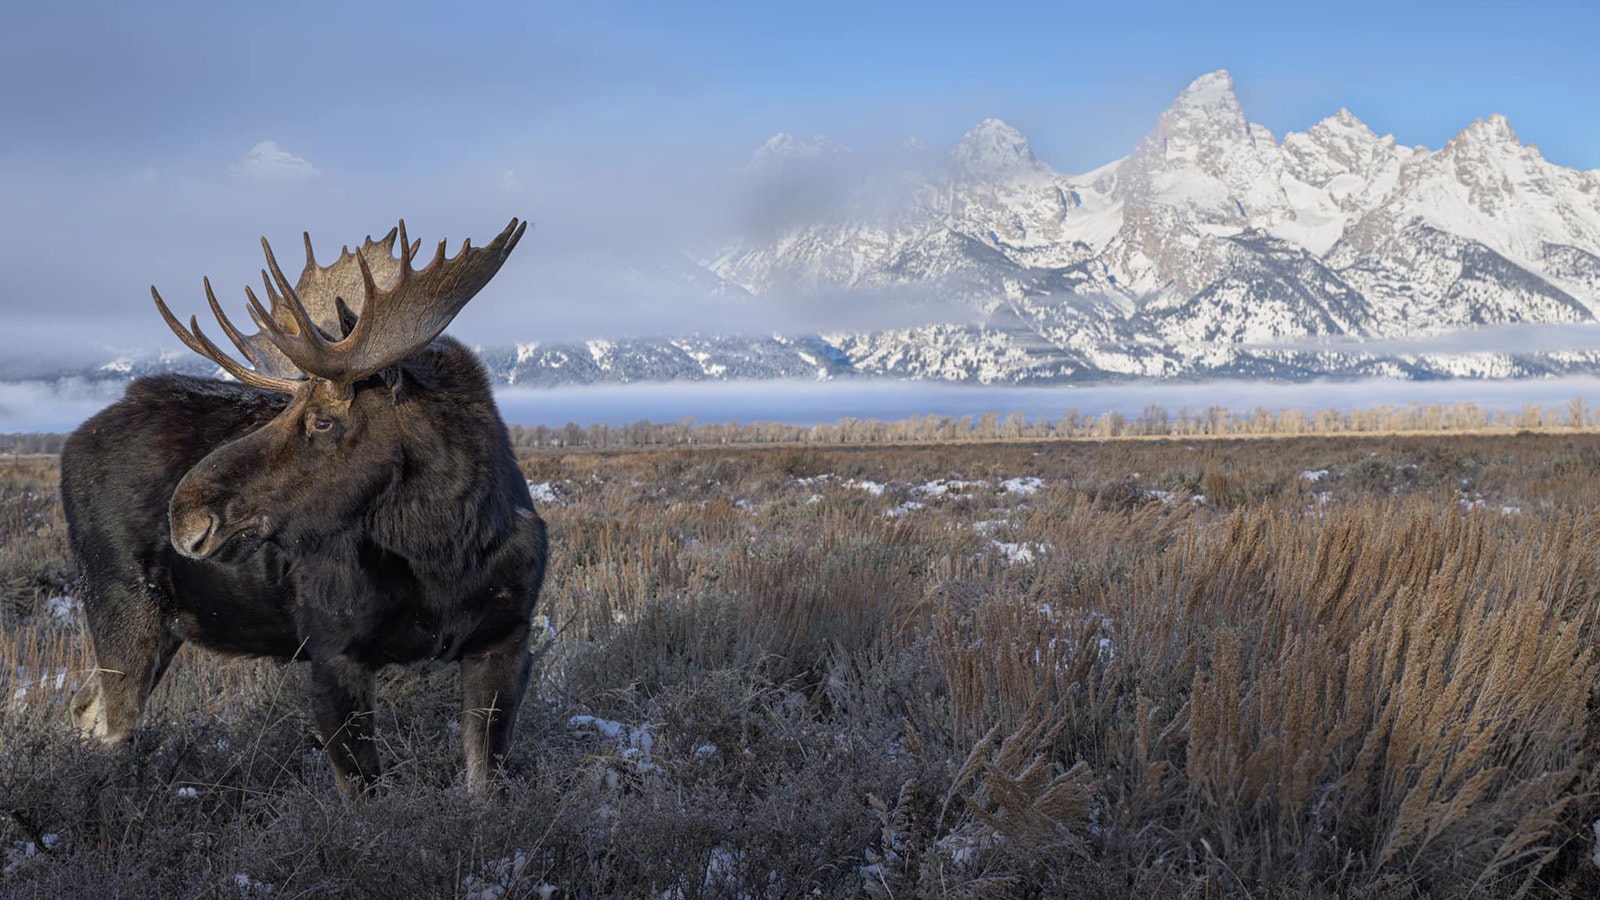 Colorado outdoors and wildlife photographer describes the planning and effort it took to be in just the right place at just the right time to get this stunning pose from a huge bull moose with the Tetons in the background.